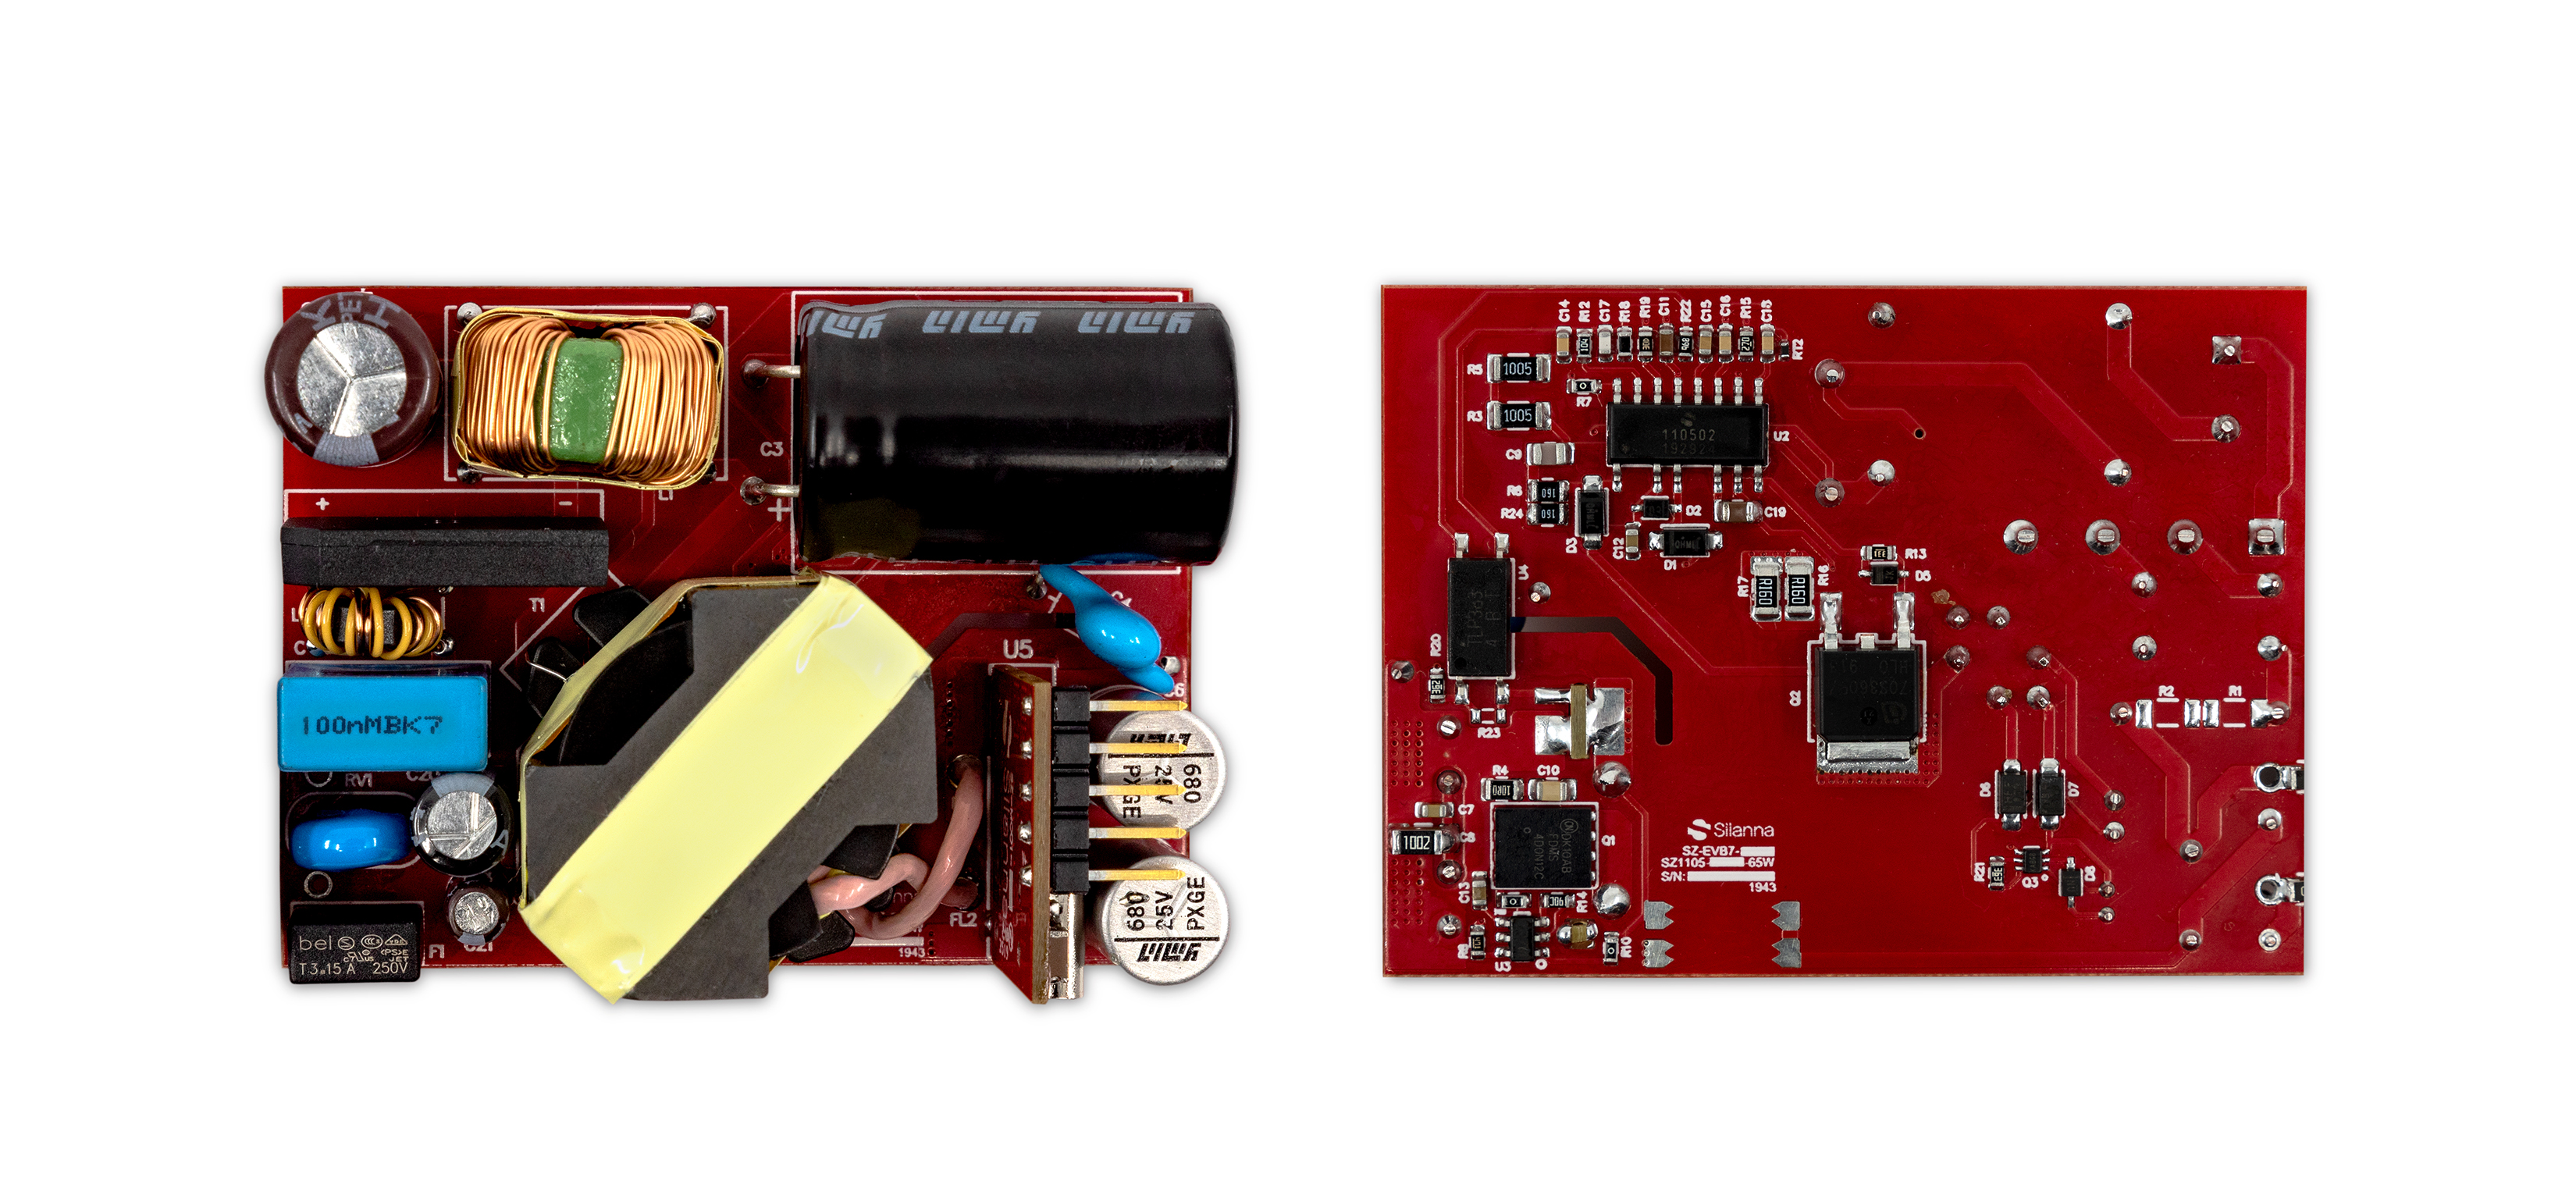 65W USB-PD Evaluation Board Using SZ1105 - Front and Back Sides